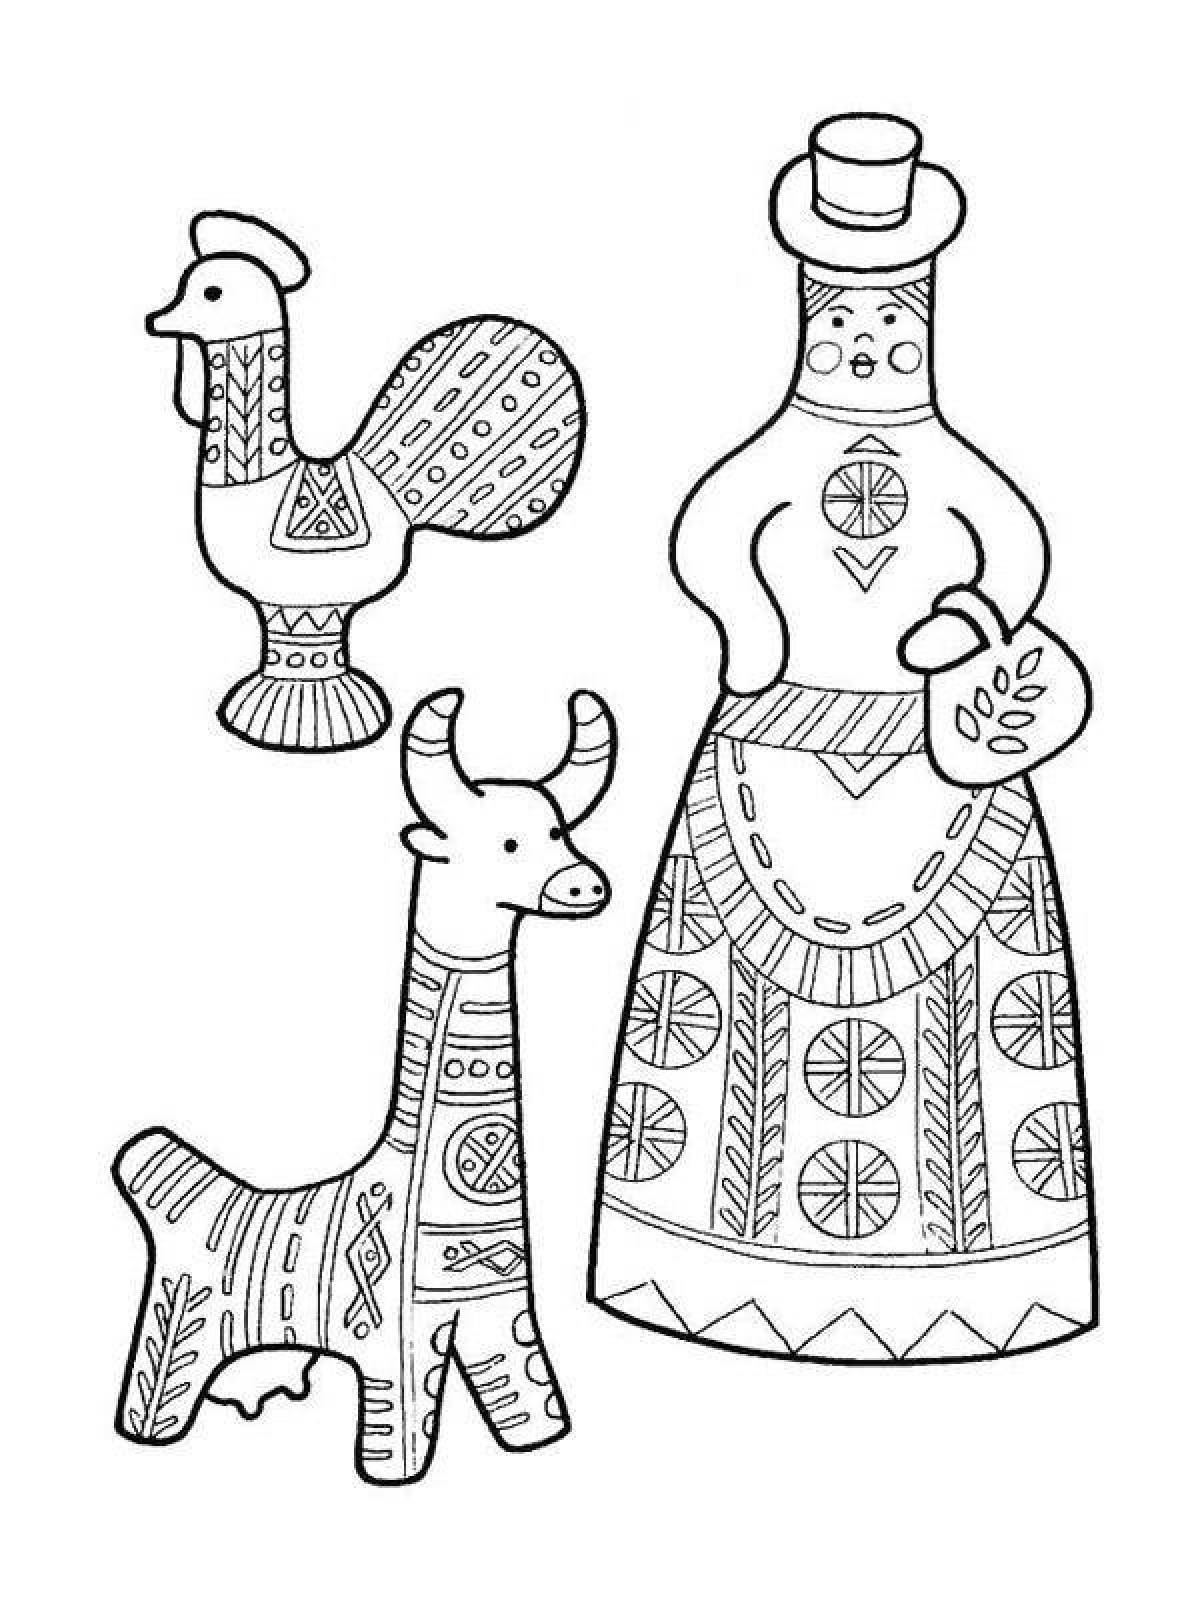 Charming crafts coloring book